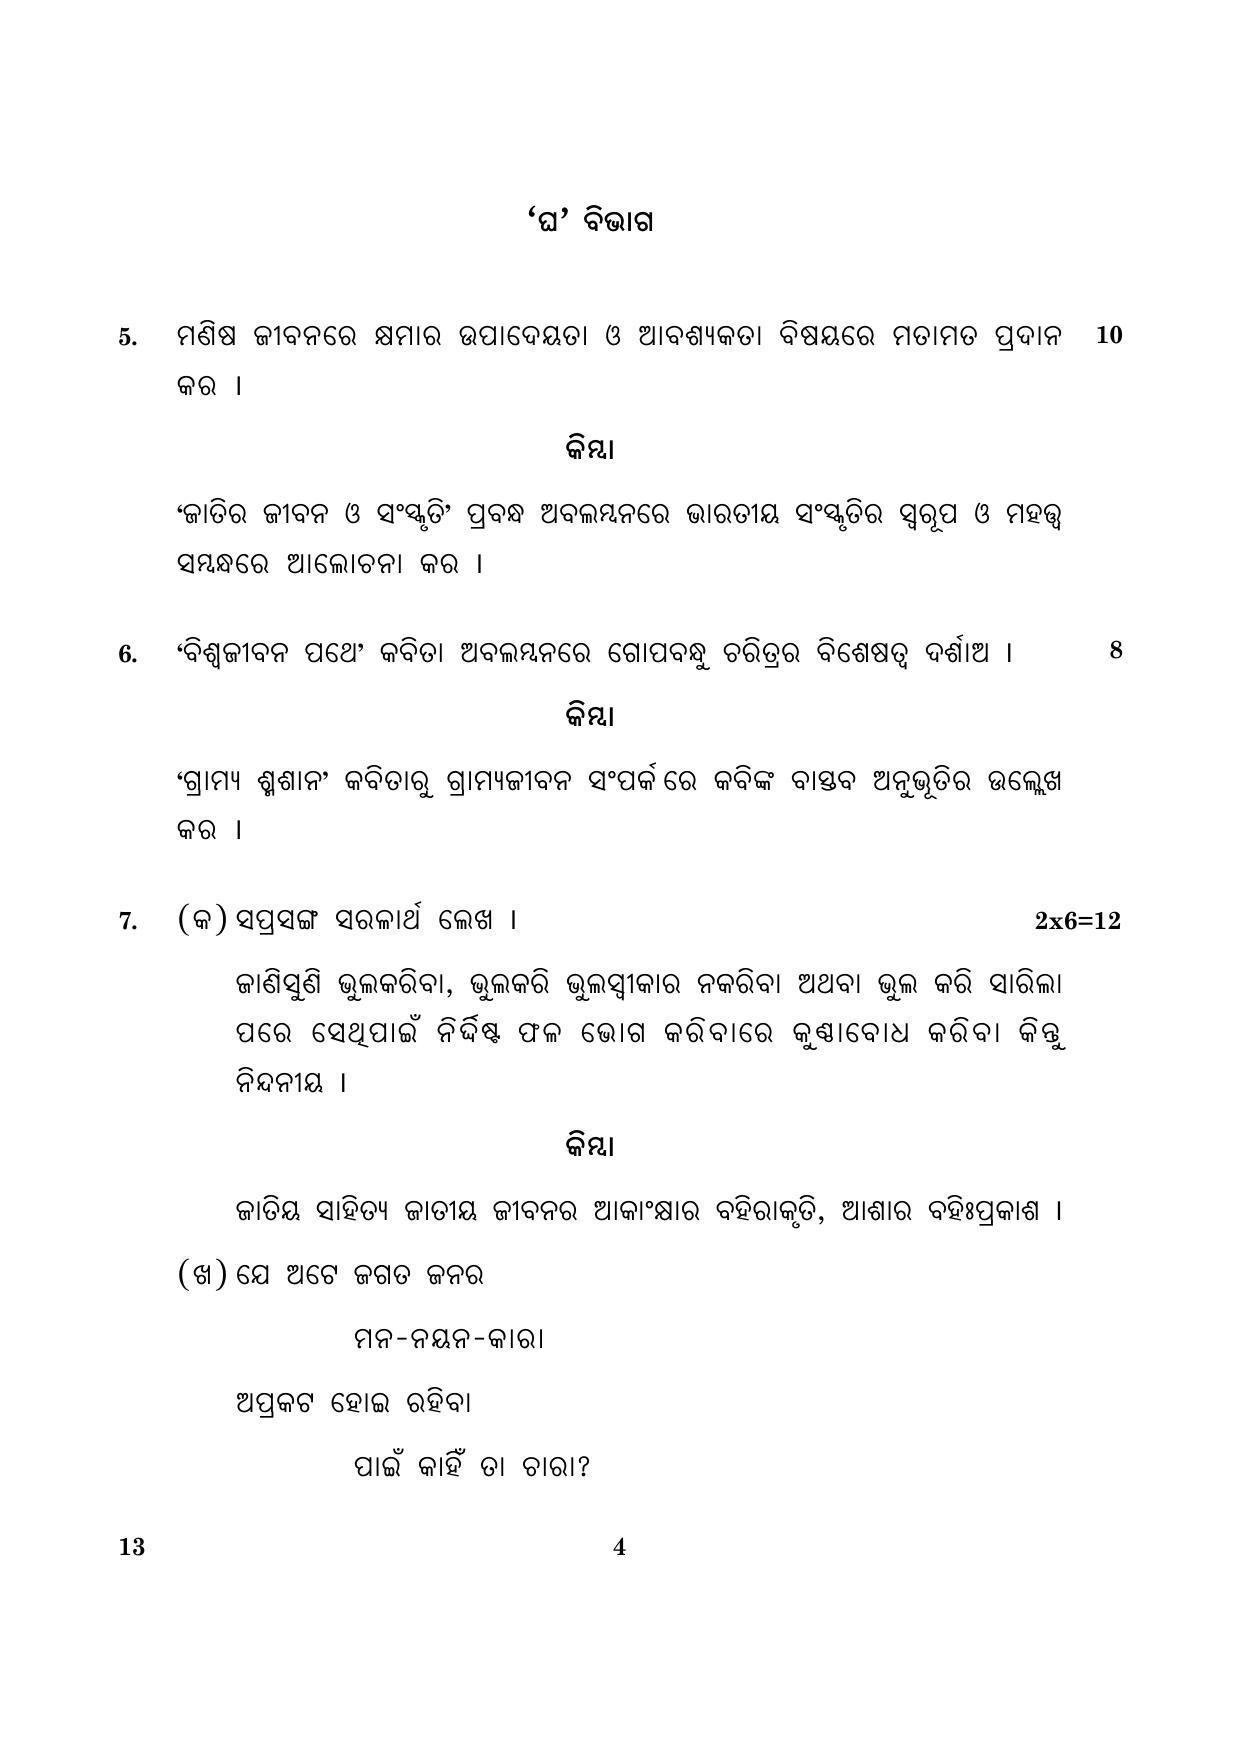 CBSE Class 12 013 Odia 2016 Question Paper - Page 4